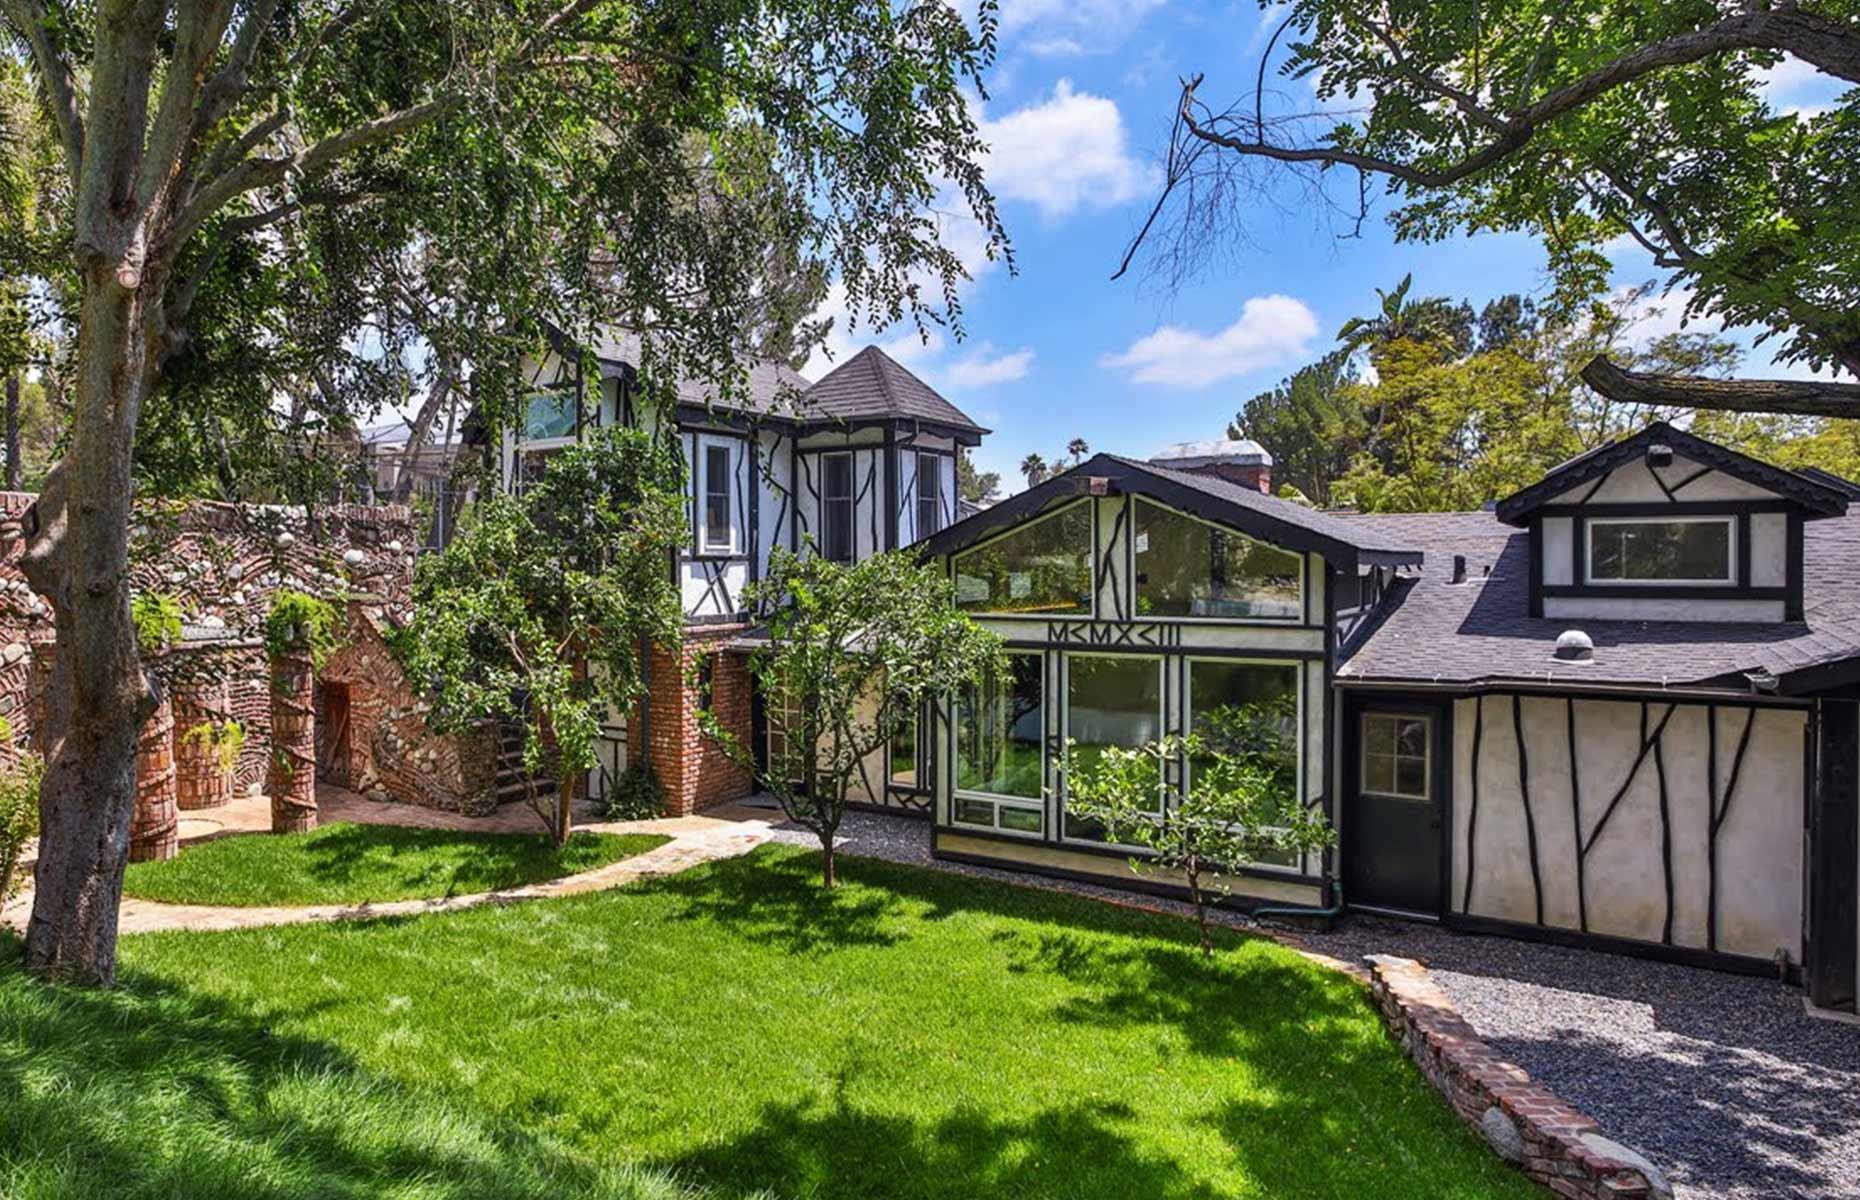 Lady Gaga's quirky Laurel Canyon compound